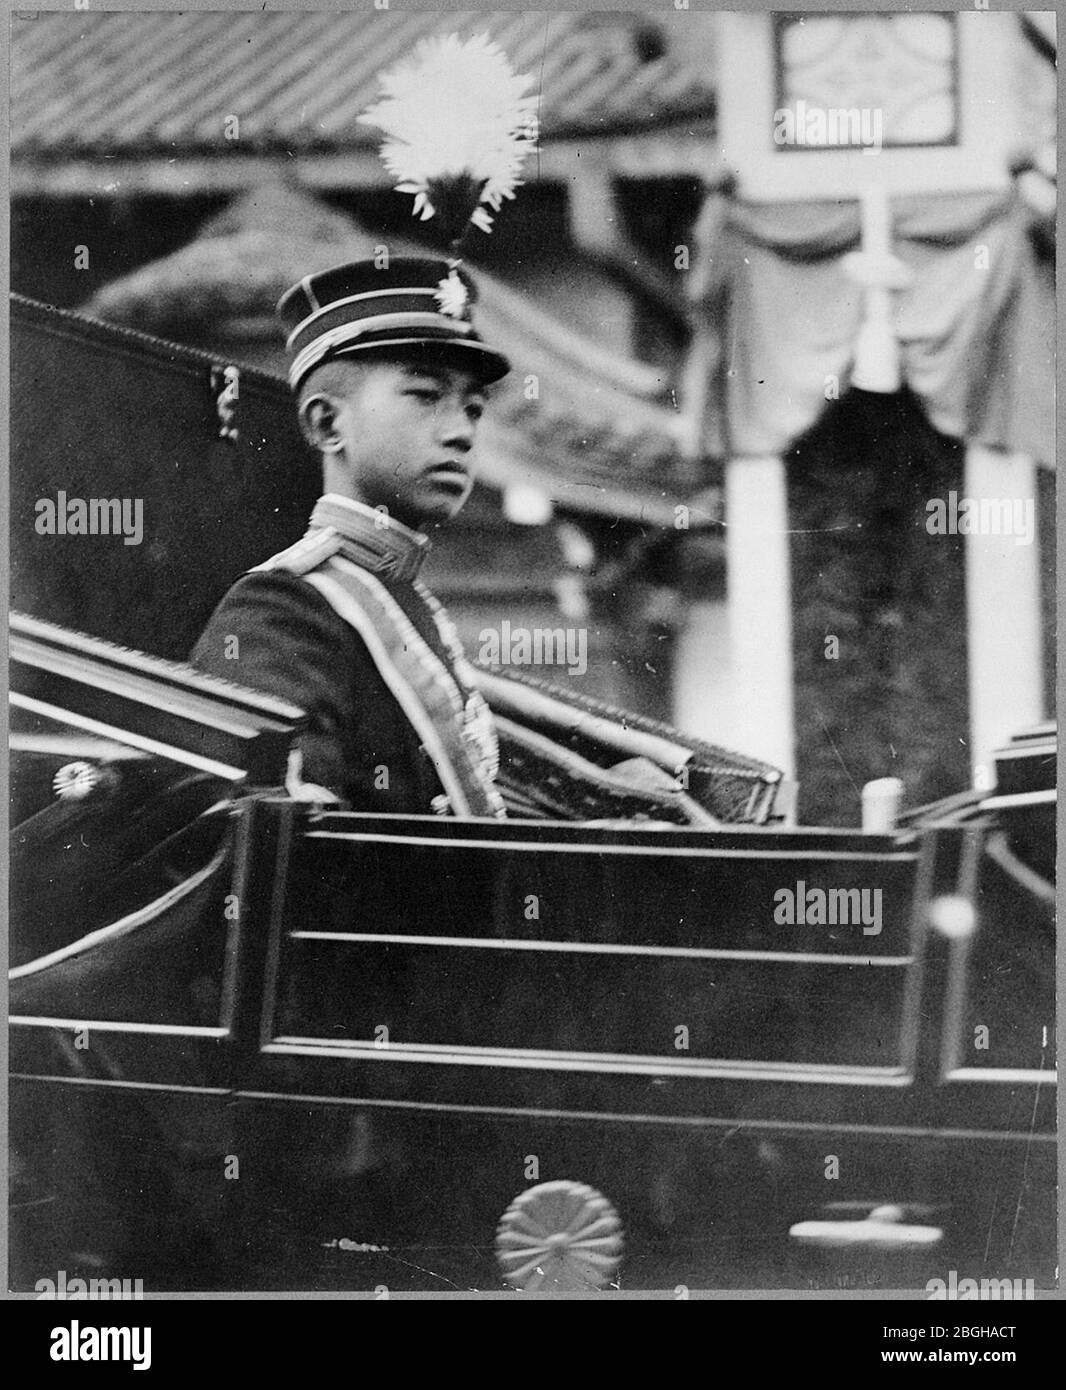 Hirohito, Emperor of Japan, half-length portrait, facing right, seated in carriage with chrysanthemum emblem on the door. Stock Photo